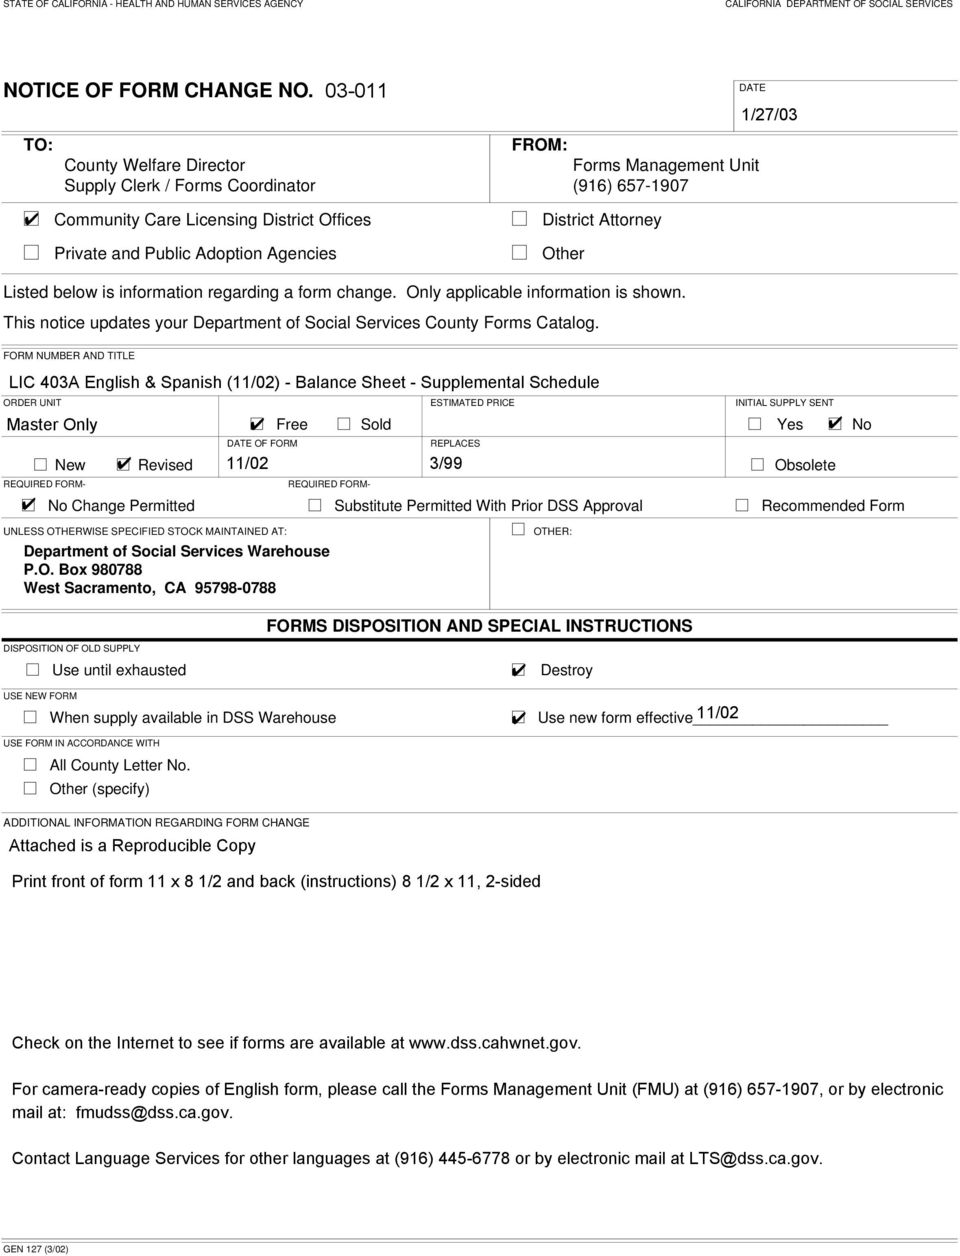 Attorney Other Listed below is information regarding a form change. applicable information is shown. This notice updates your Department of Social Services County Forms Catalog.